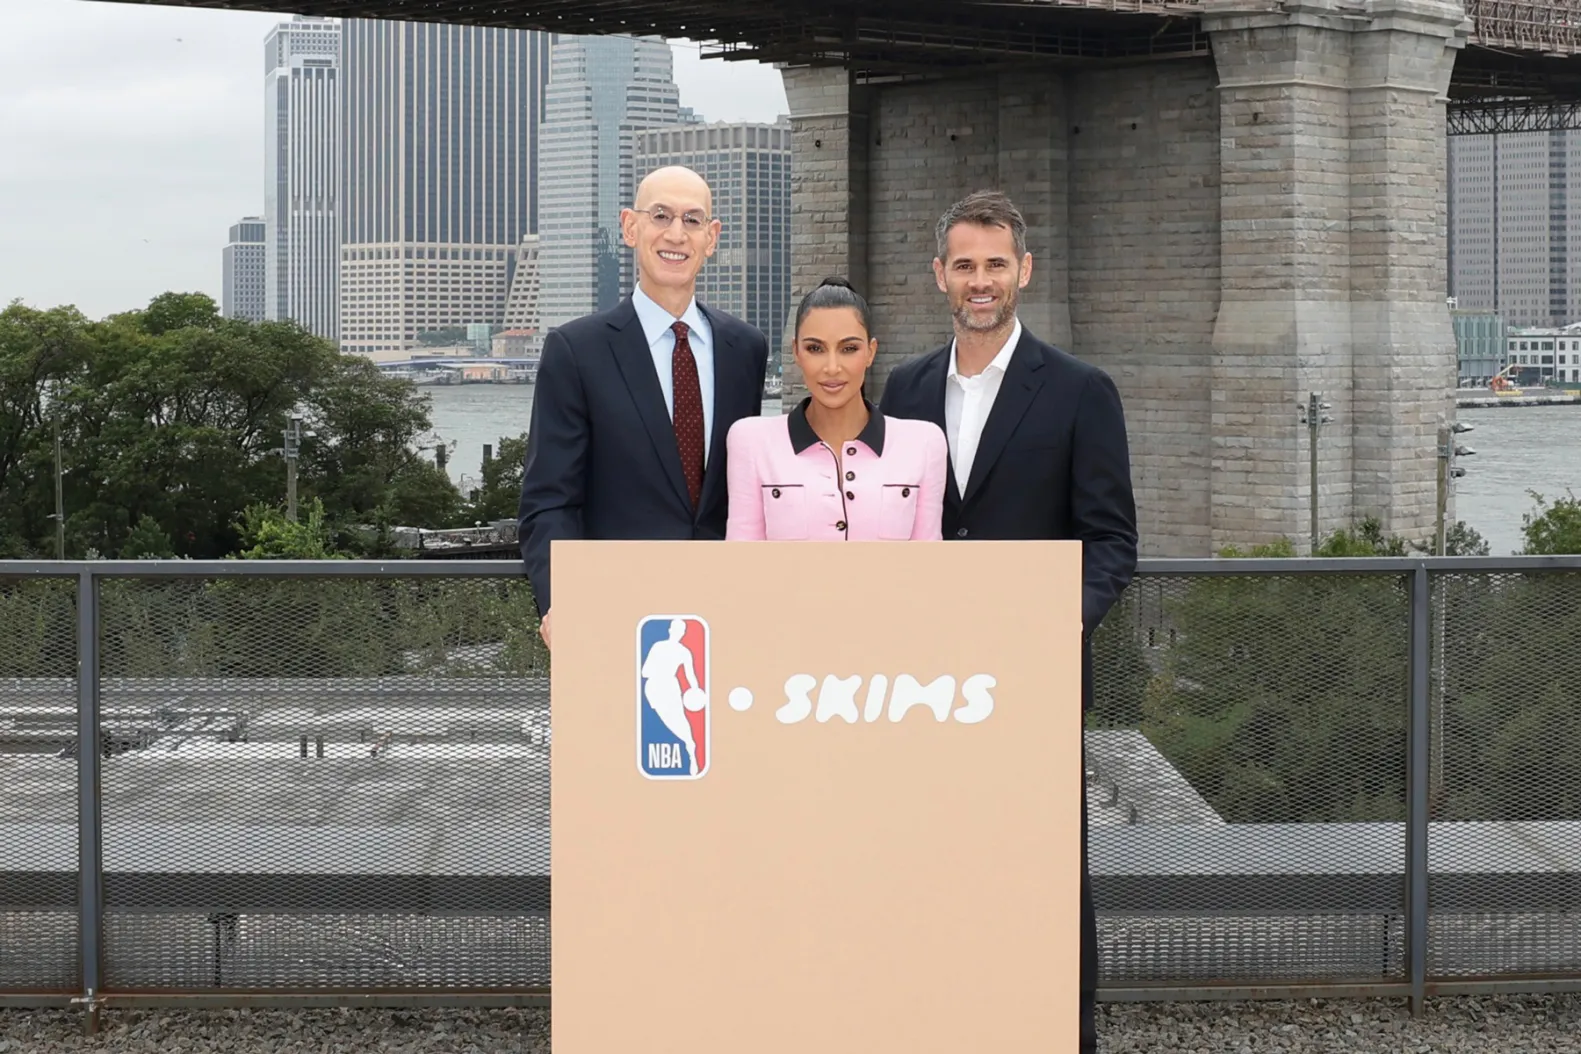 Strategic Brand Partnerships Are Finally Becoming The Norm In The WNBA